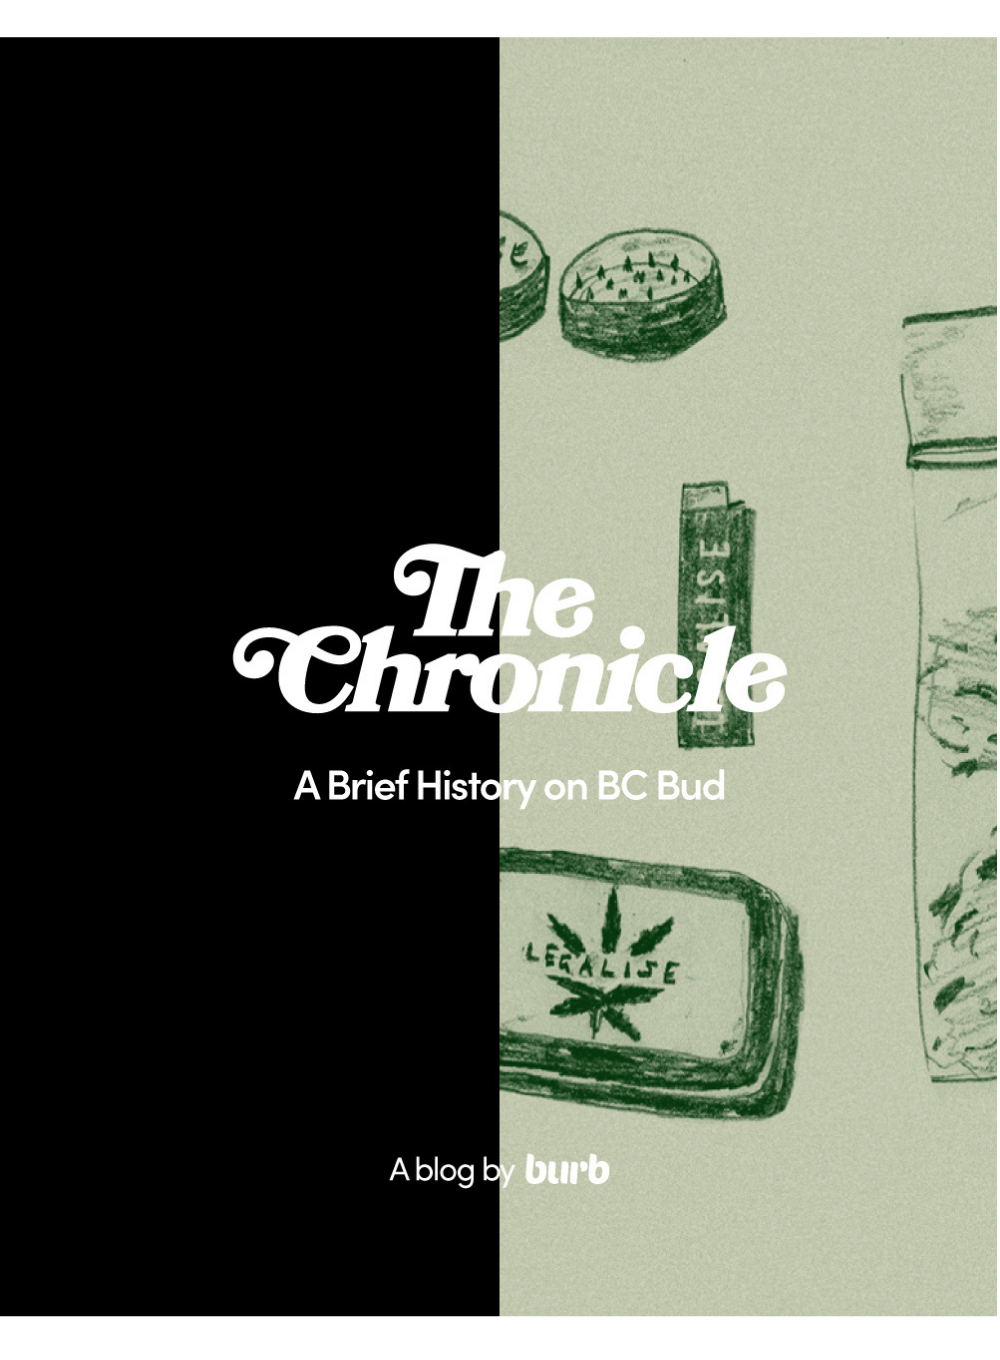 A Brief History on BC Bud